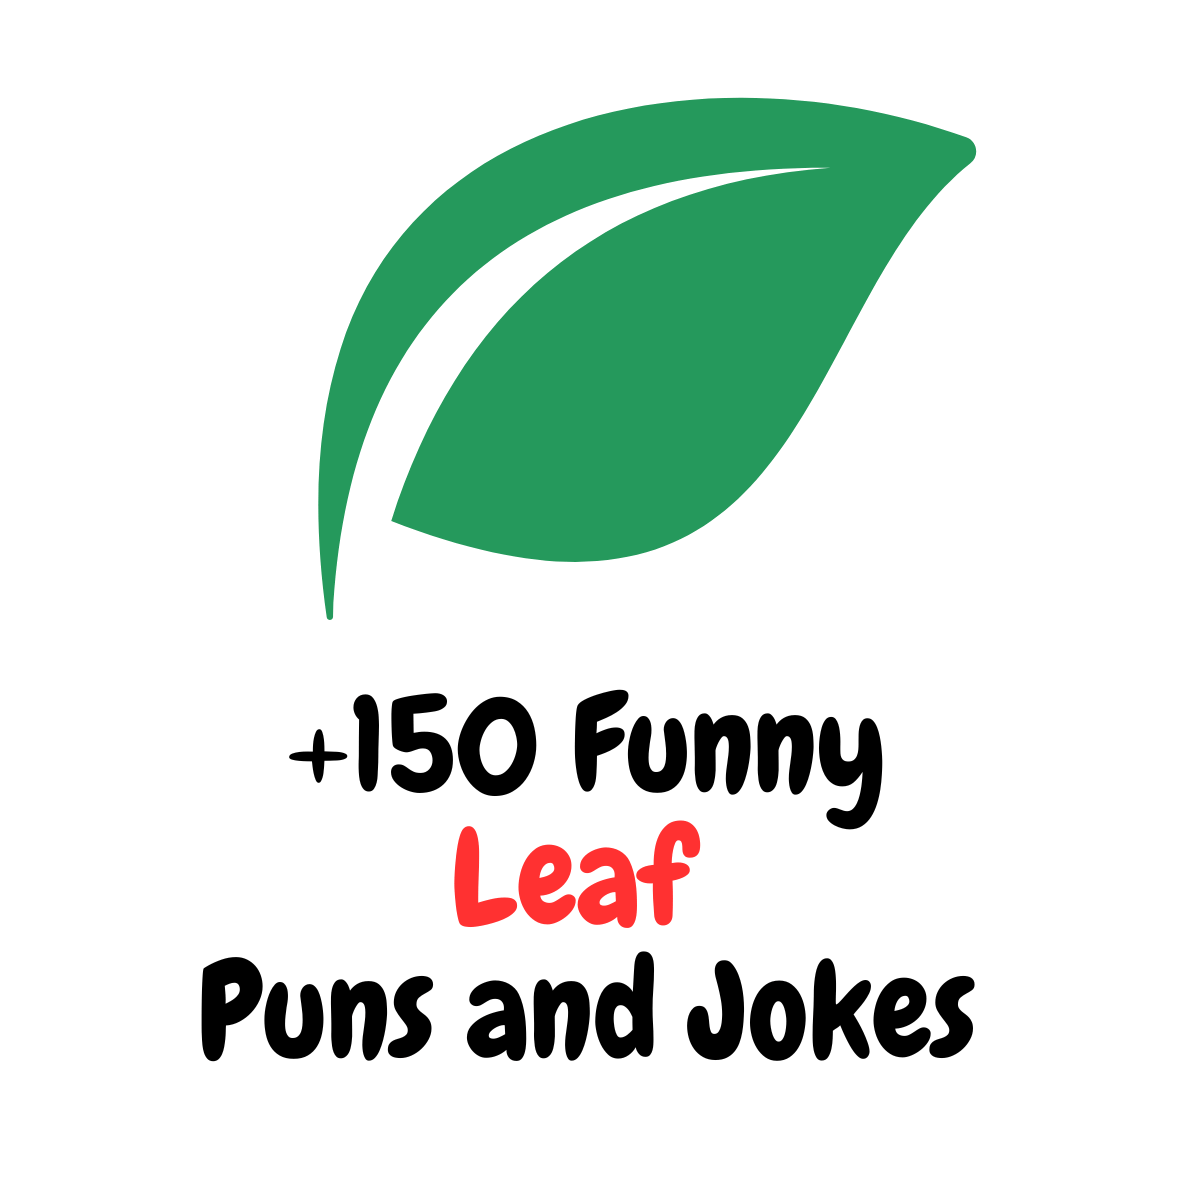 +150 Leaf Puns and Jokes: Falling for Humor